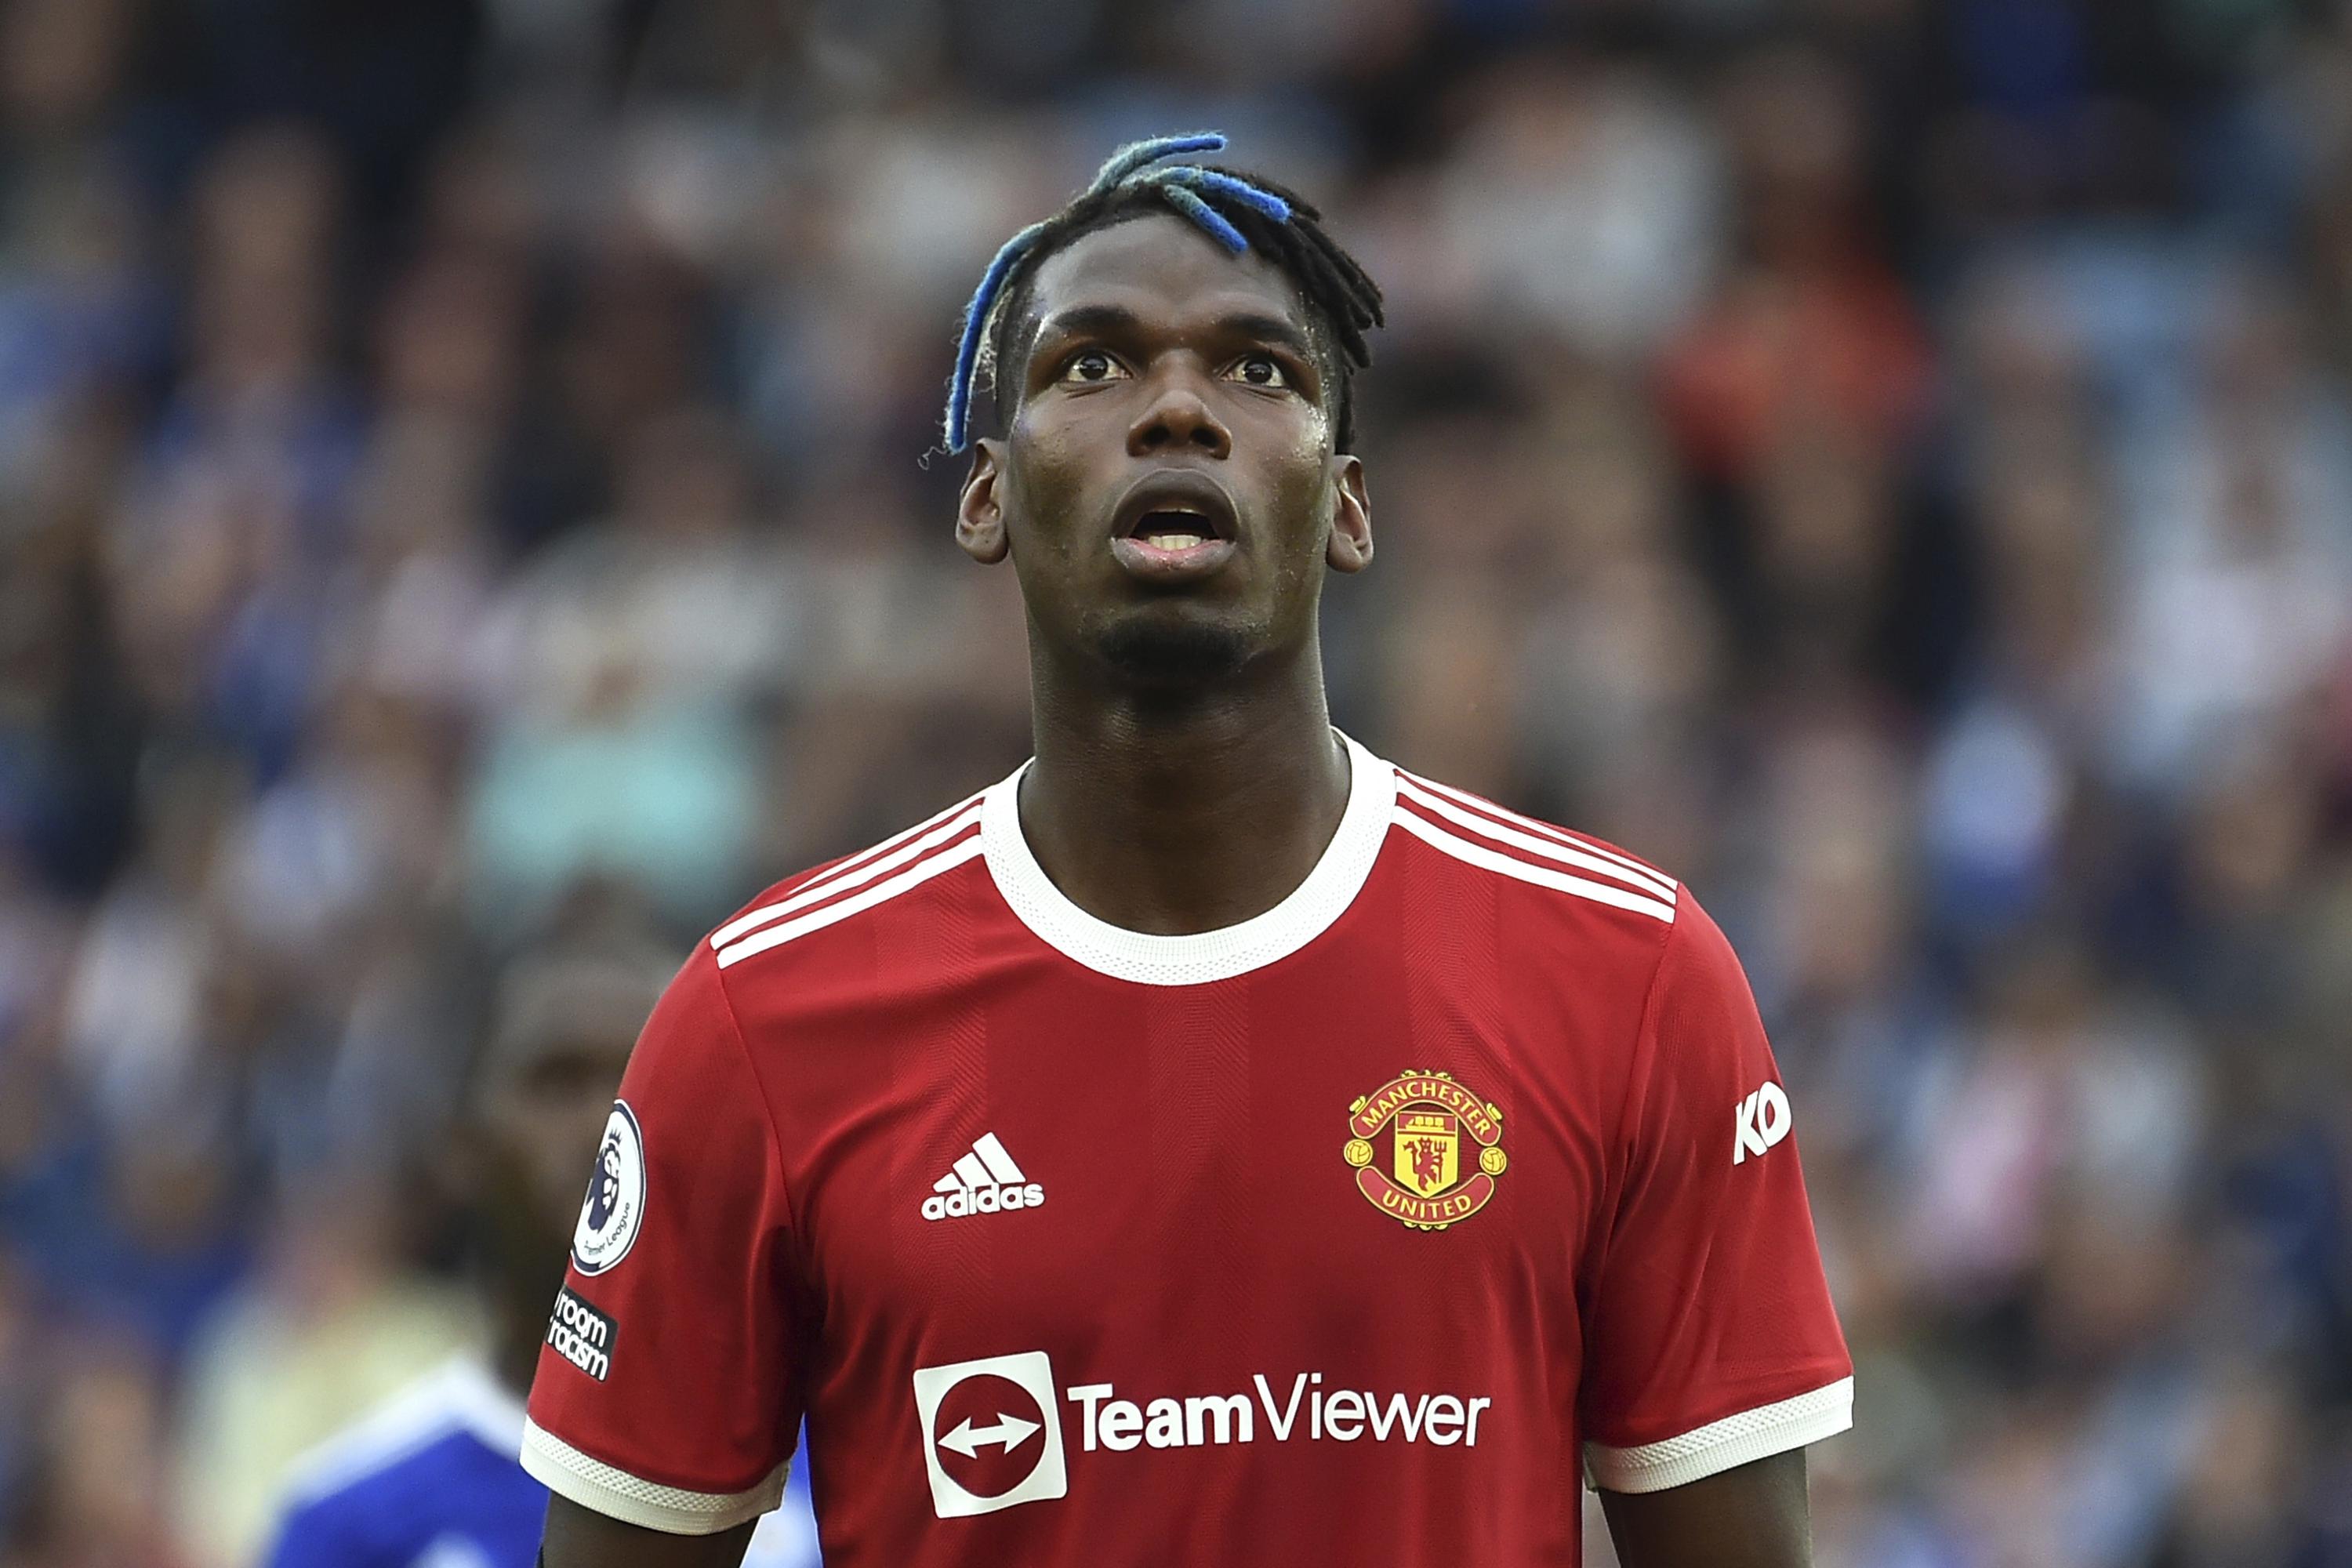 Pogba’s World Cup place in doubt amid scandal and bad knee